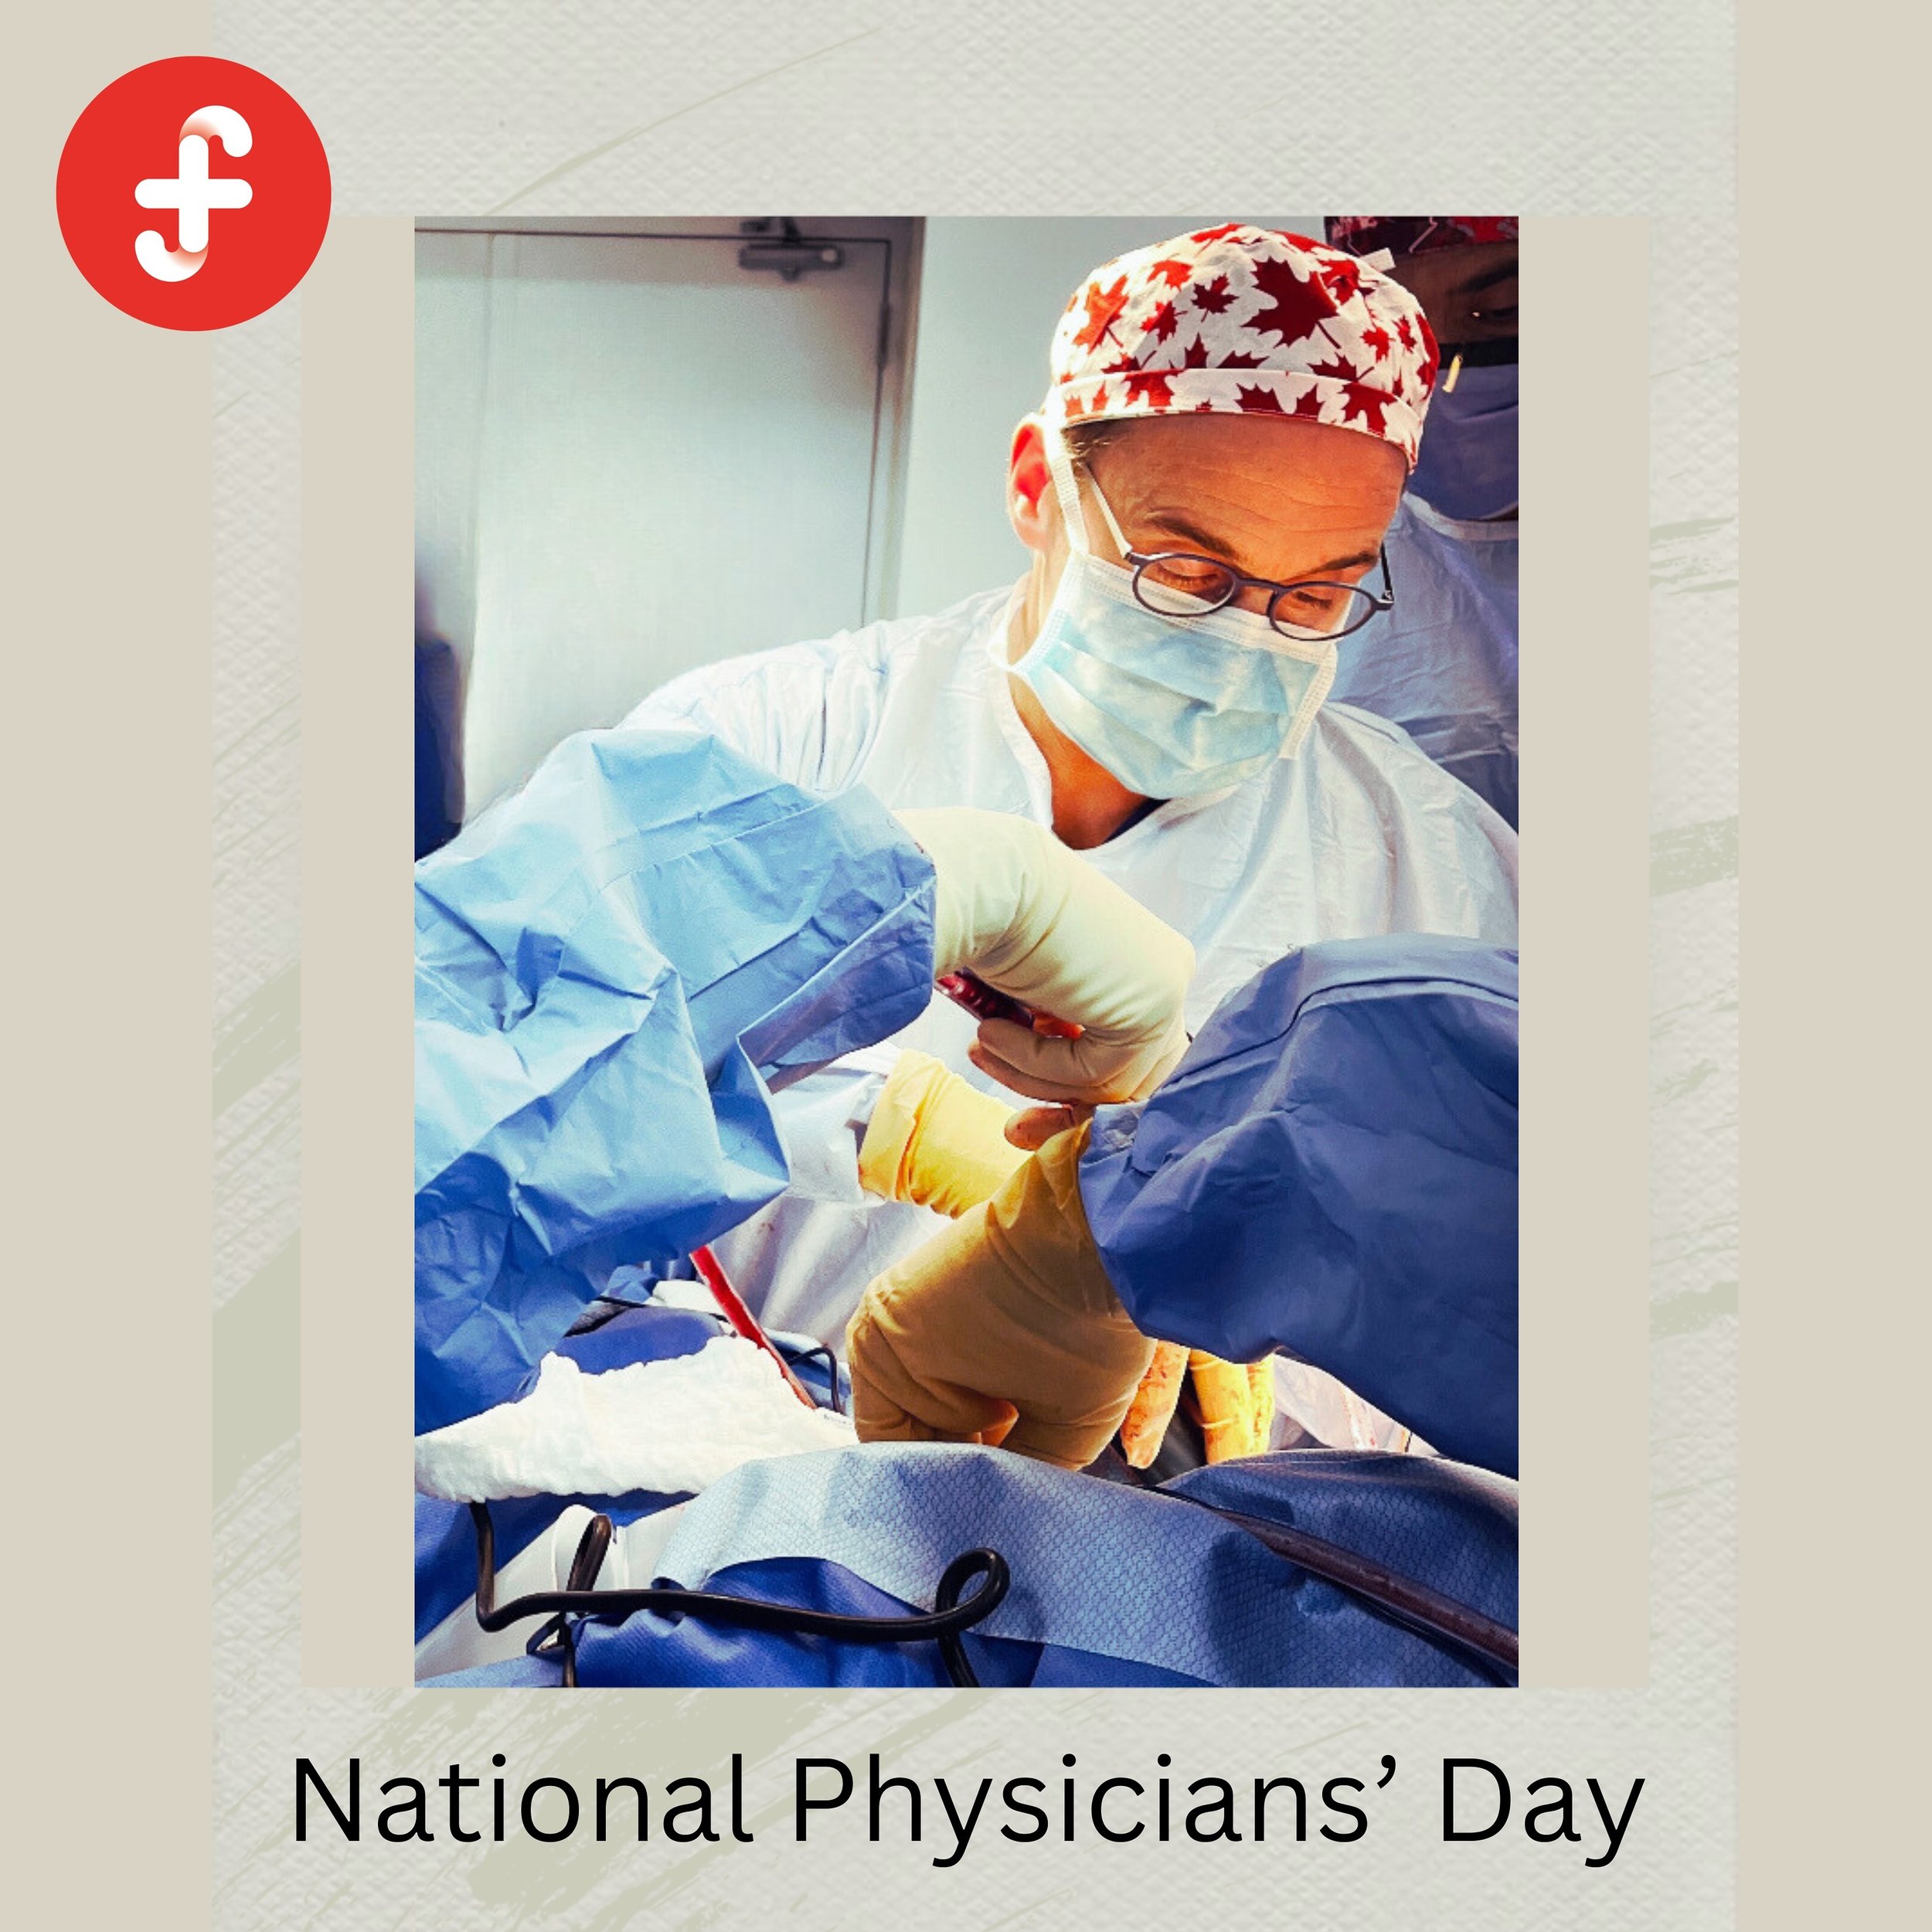 May 1st is National Physicians&rsquo; Day in Canada.🇨🇦 

It is a day to recognize the dedication, expertise, resilience and compassion of doctors nationwide.

From bustling urban centers to remote rural communities, our physicians play a vital role